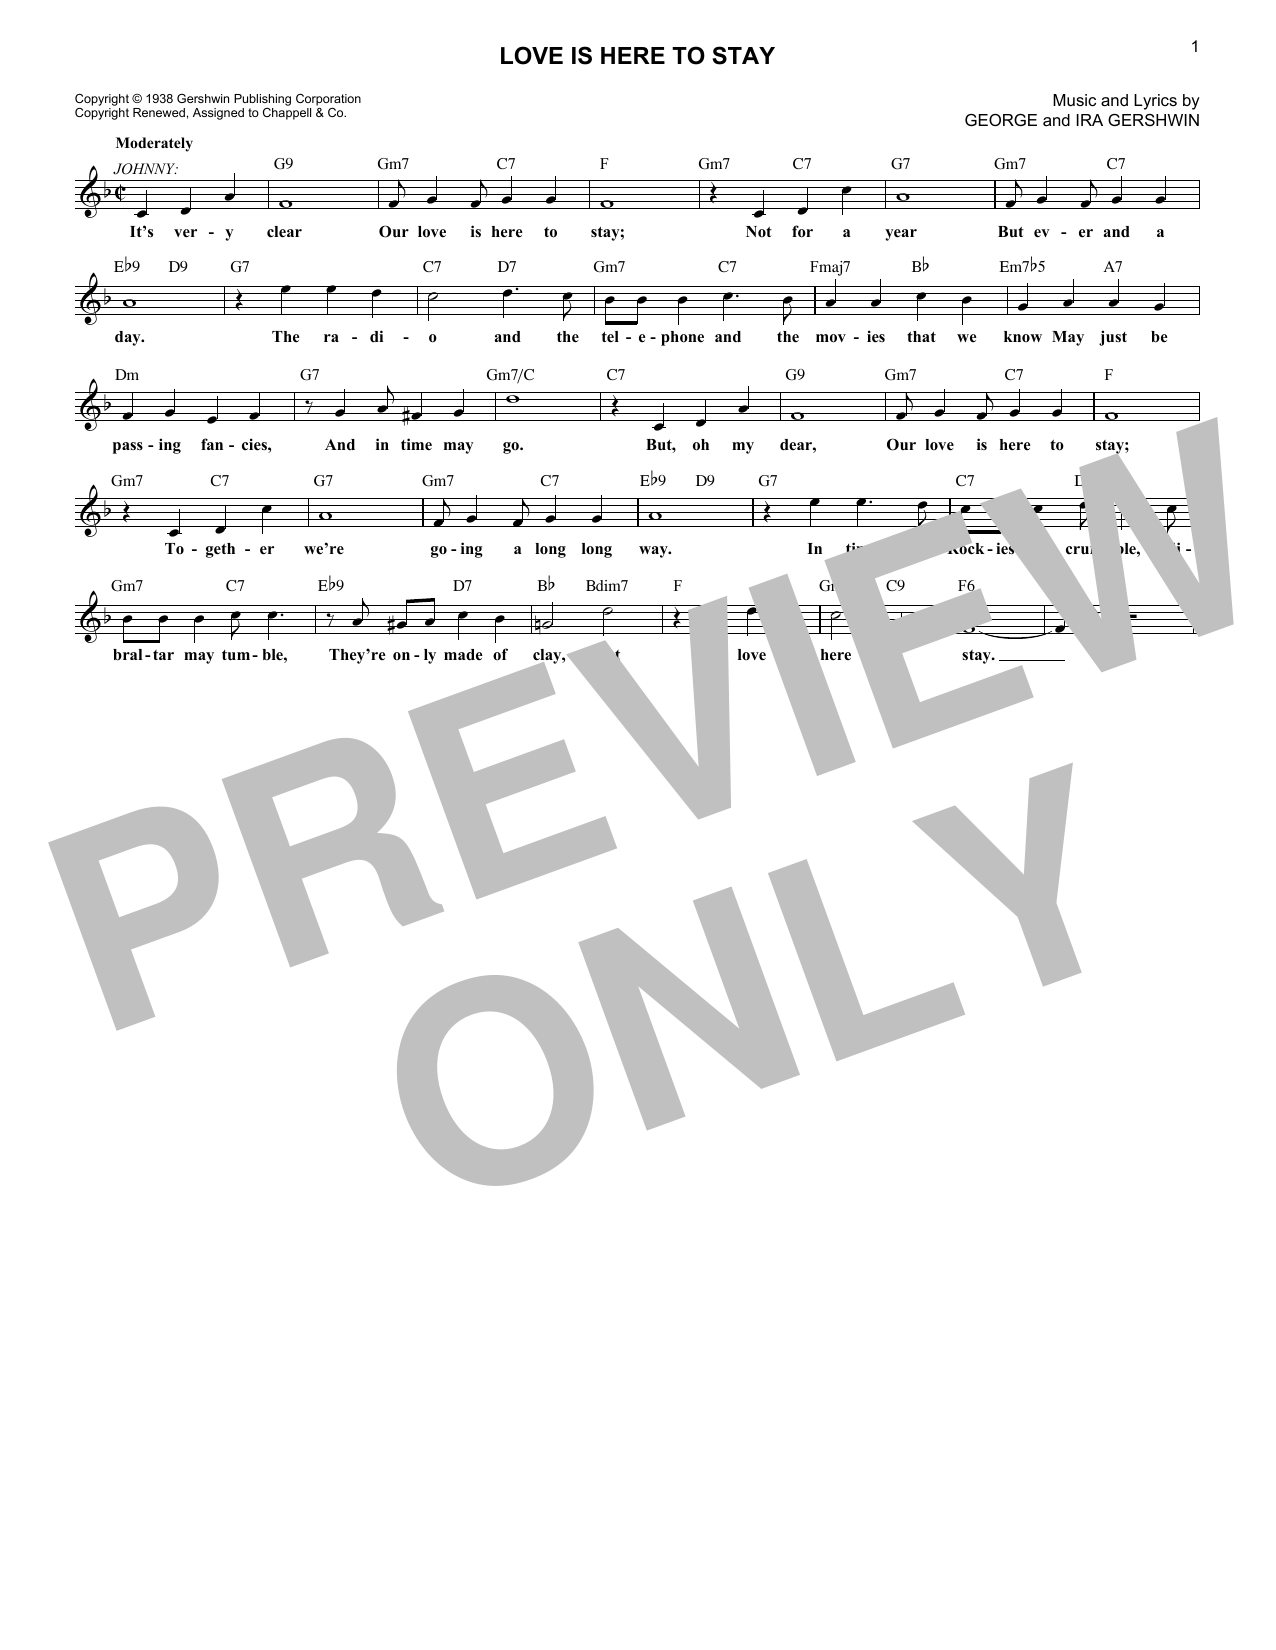 Download George Gershwin Love Is Here To Stay Sheet Music